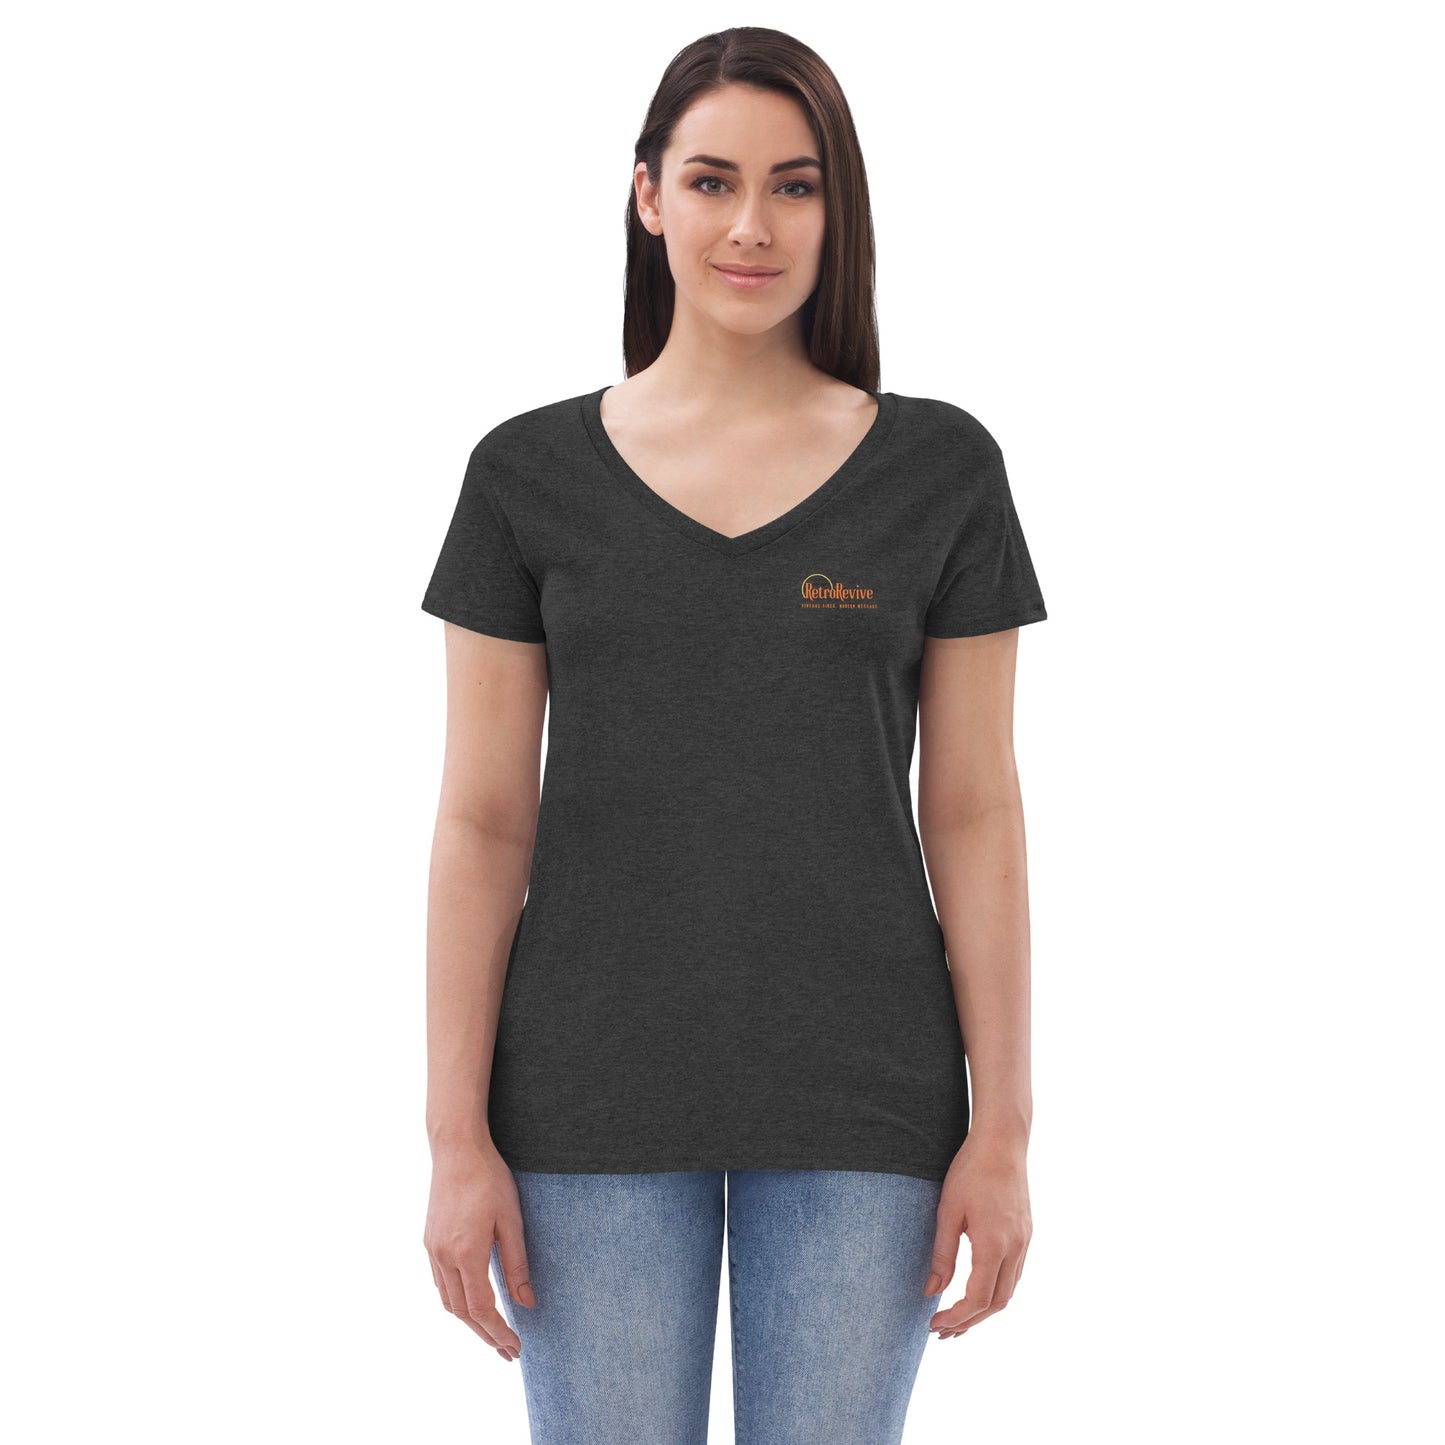 They Did Not Leave Your Life. I Moved Them. - GOD Women’s Recycled V-Neck T-Shirt